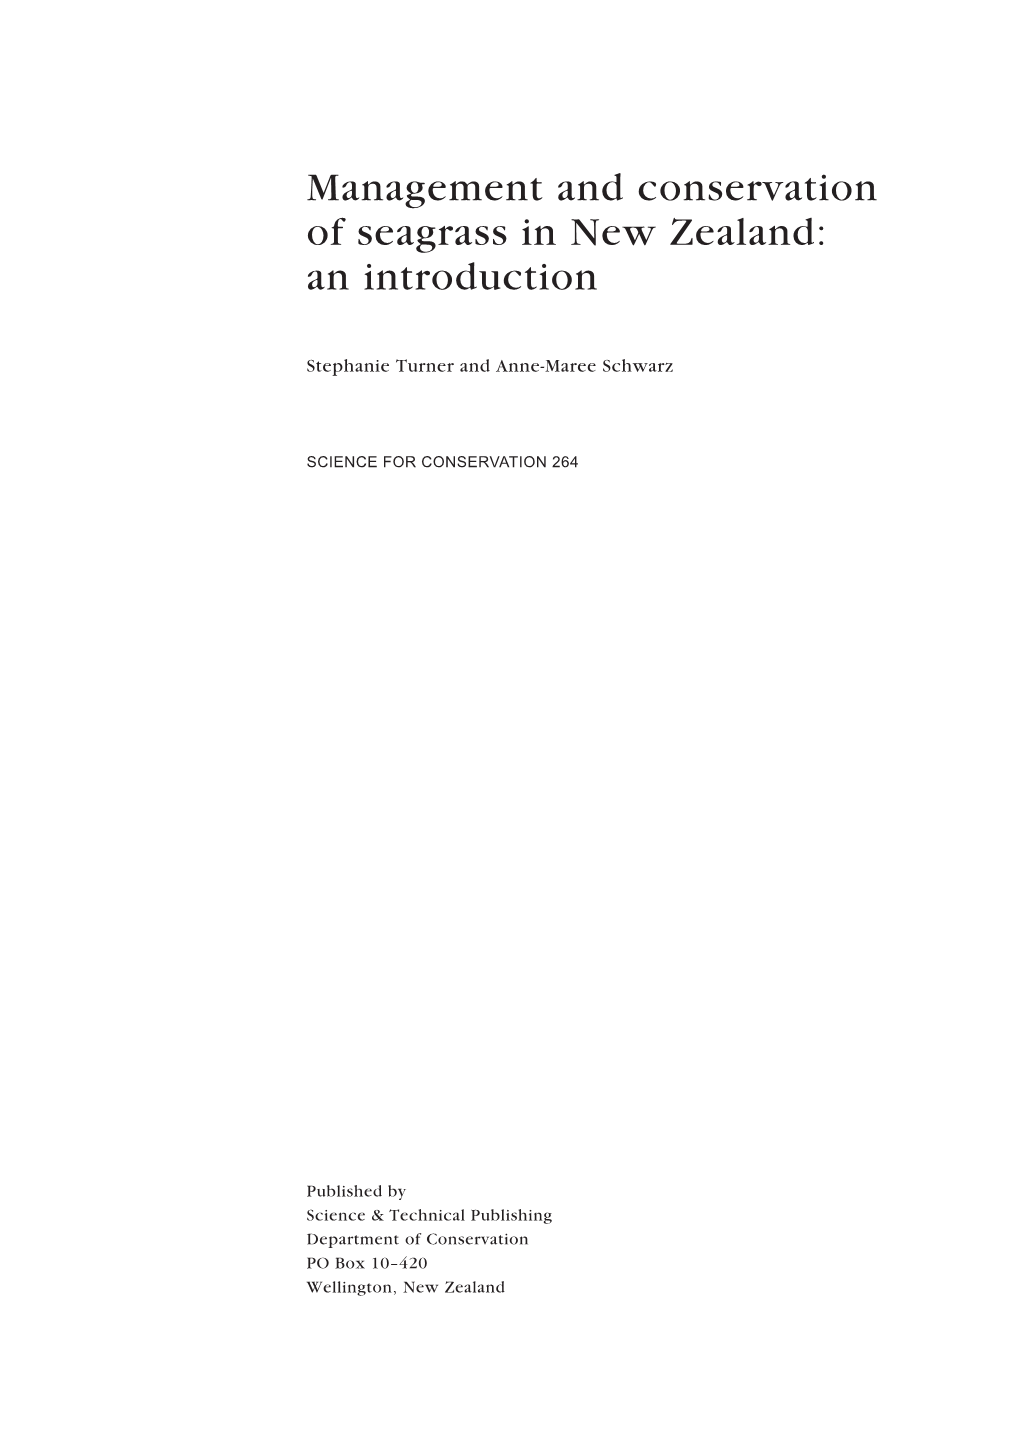 Management and Conservation of Seagrass in New Zealand: an Introduction